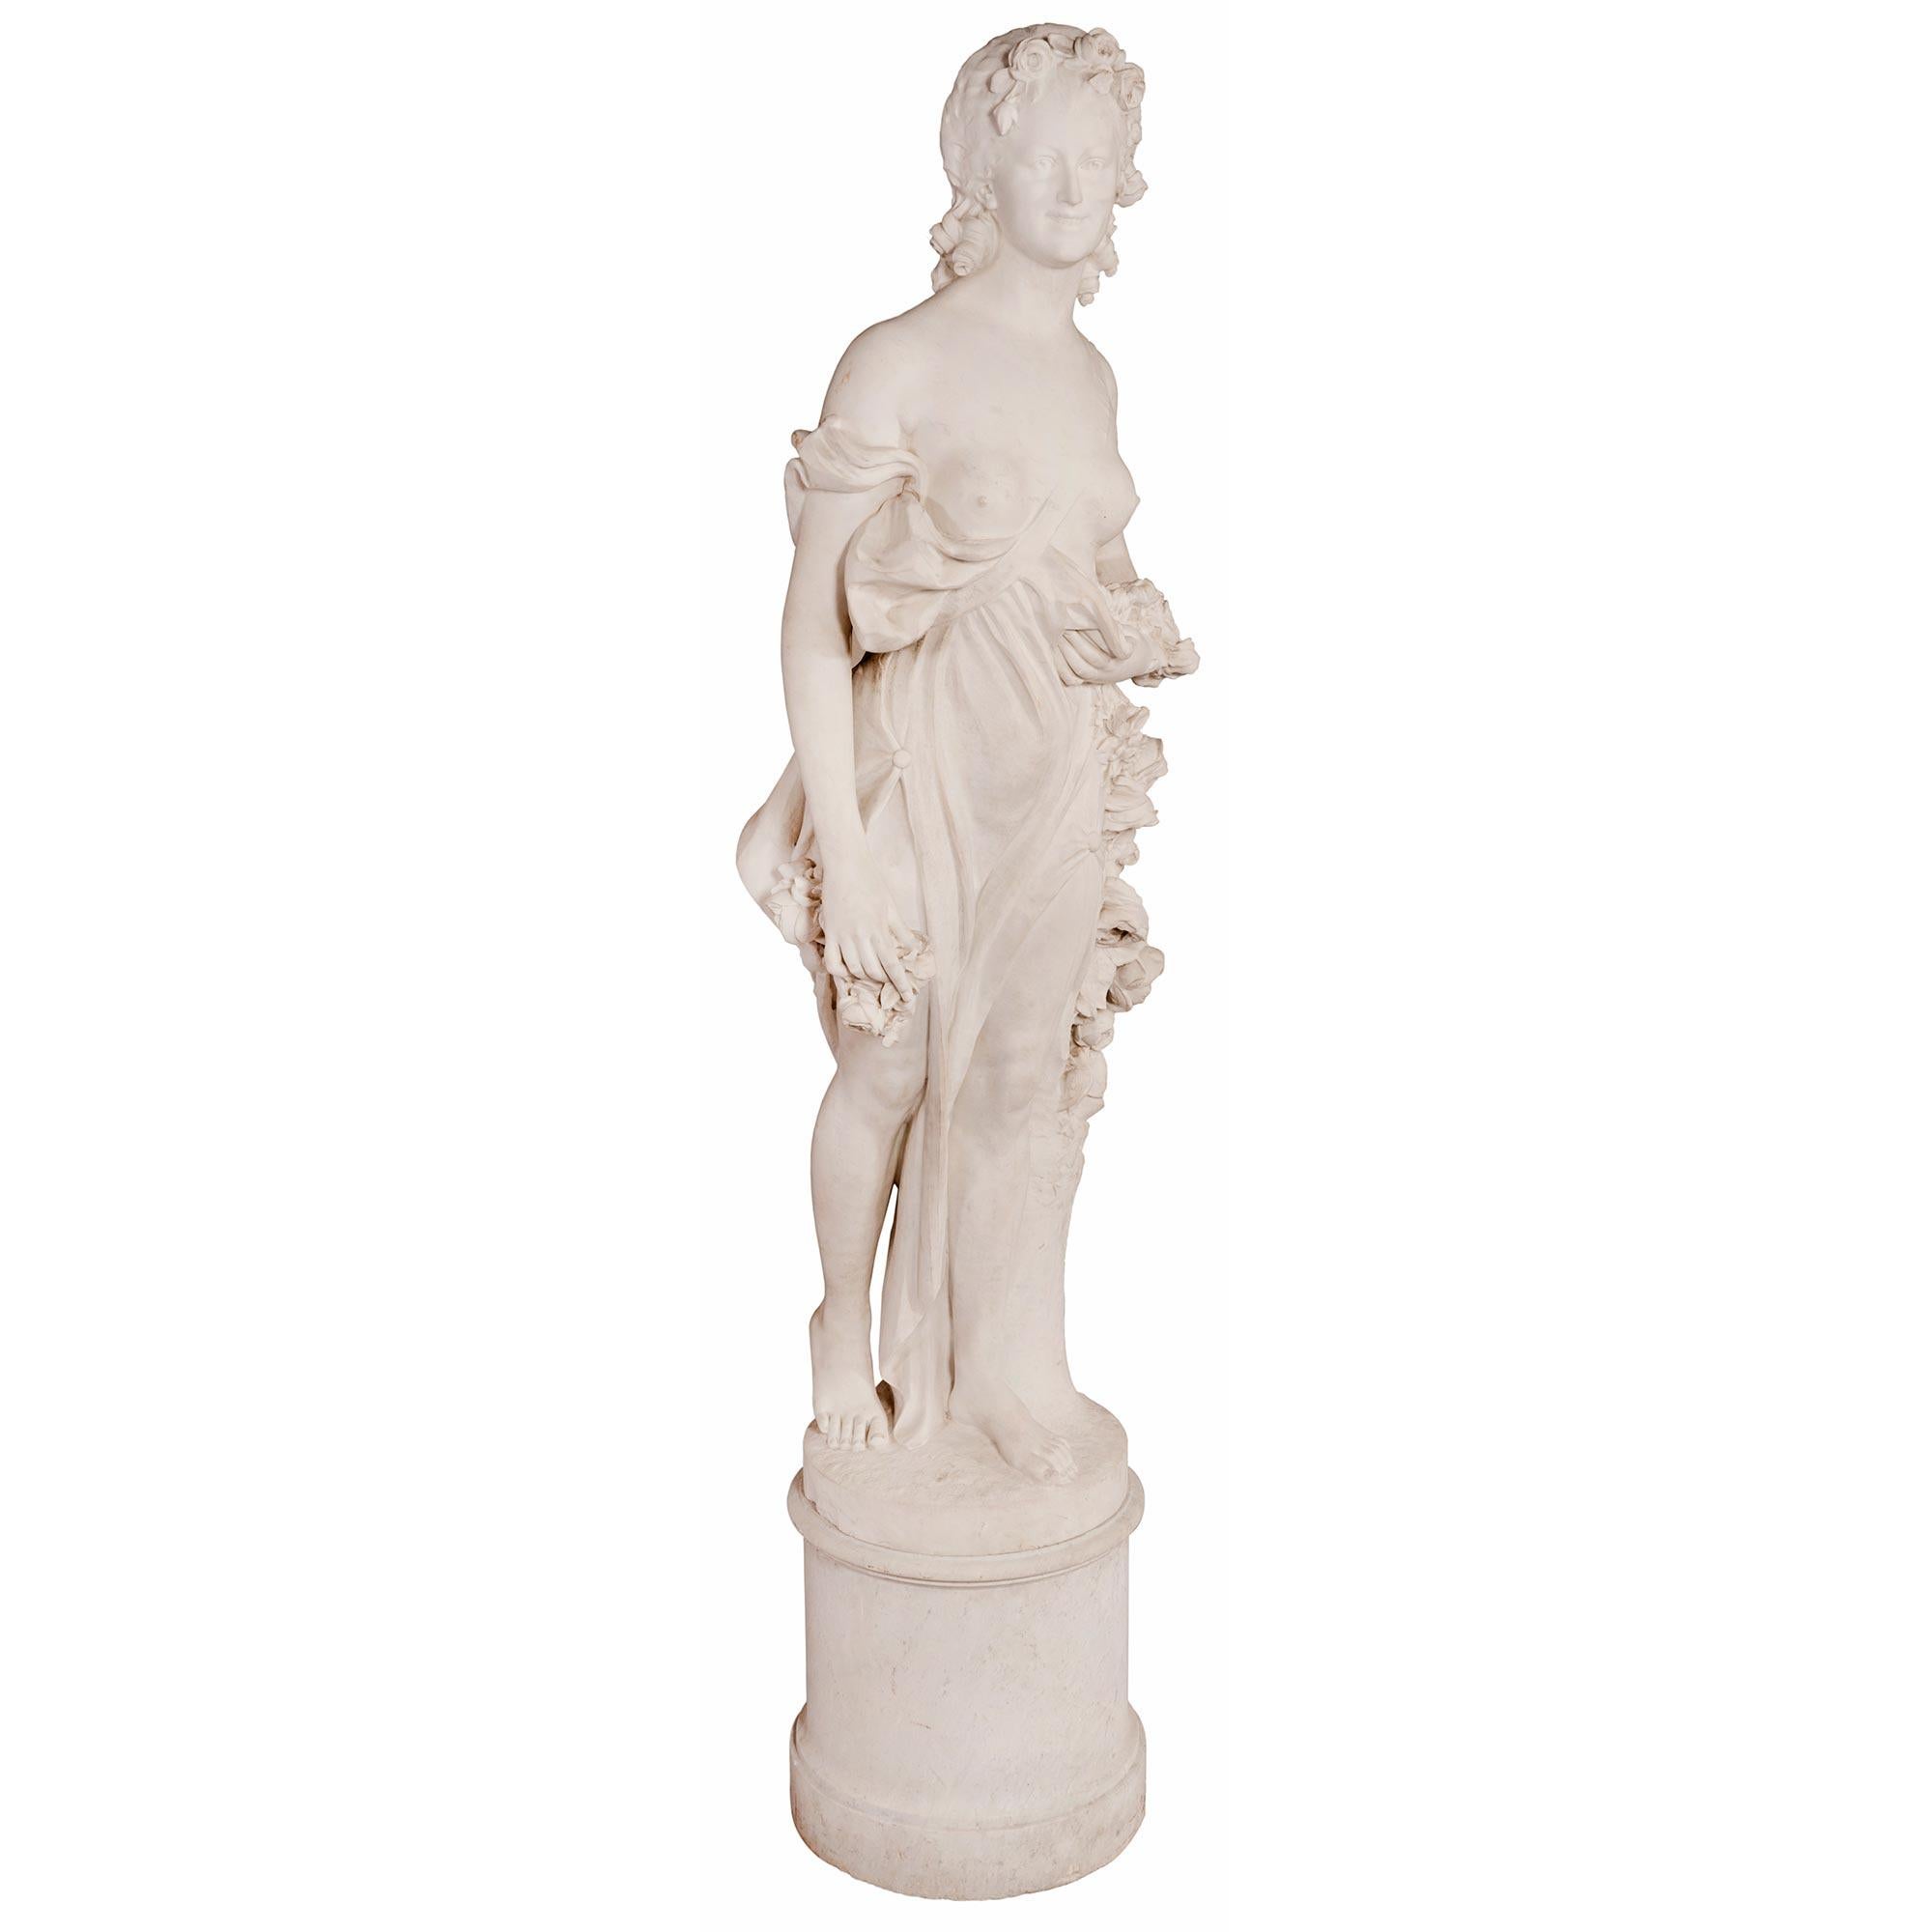 French Mid-19th Century White Carrara Marble Statue In Good Condition For Sale In West Palm Beach, FL